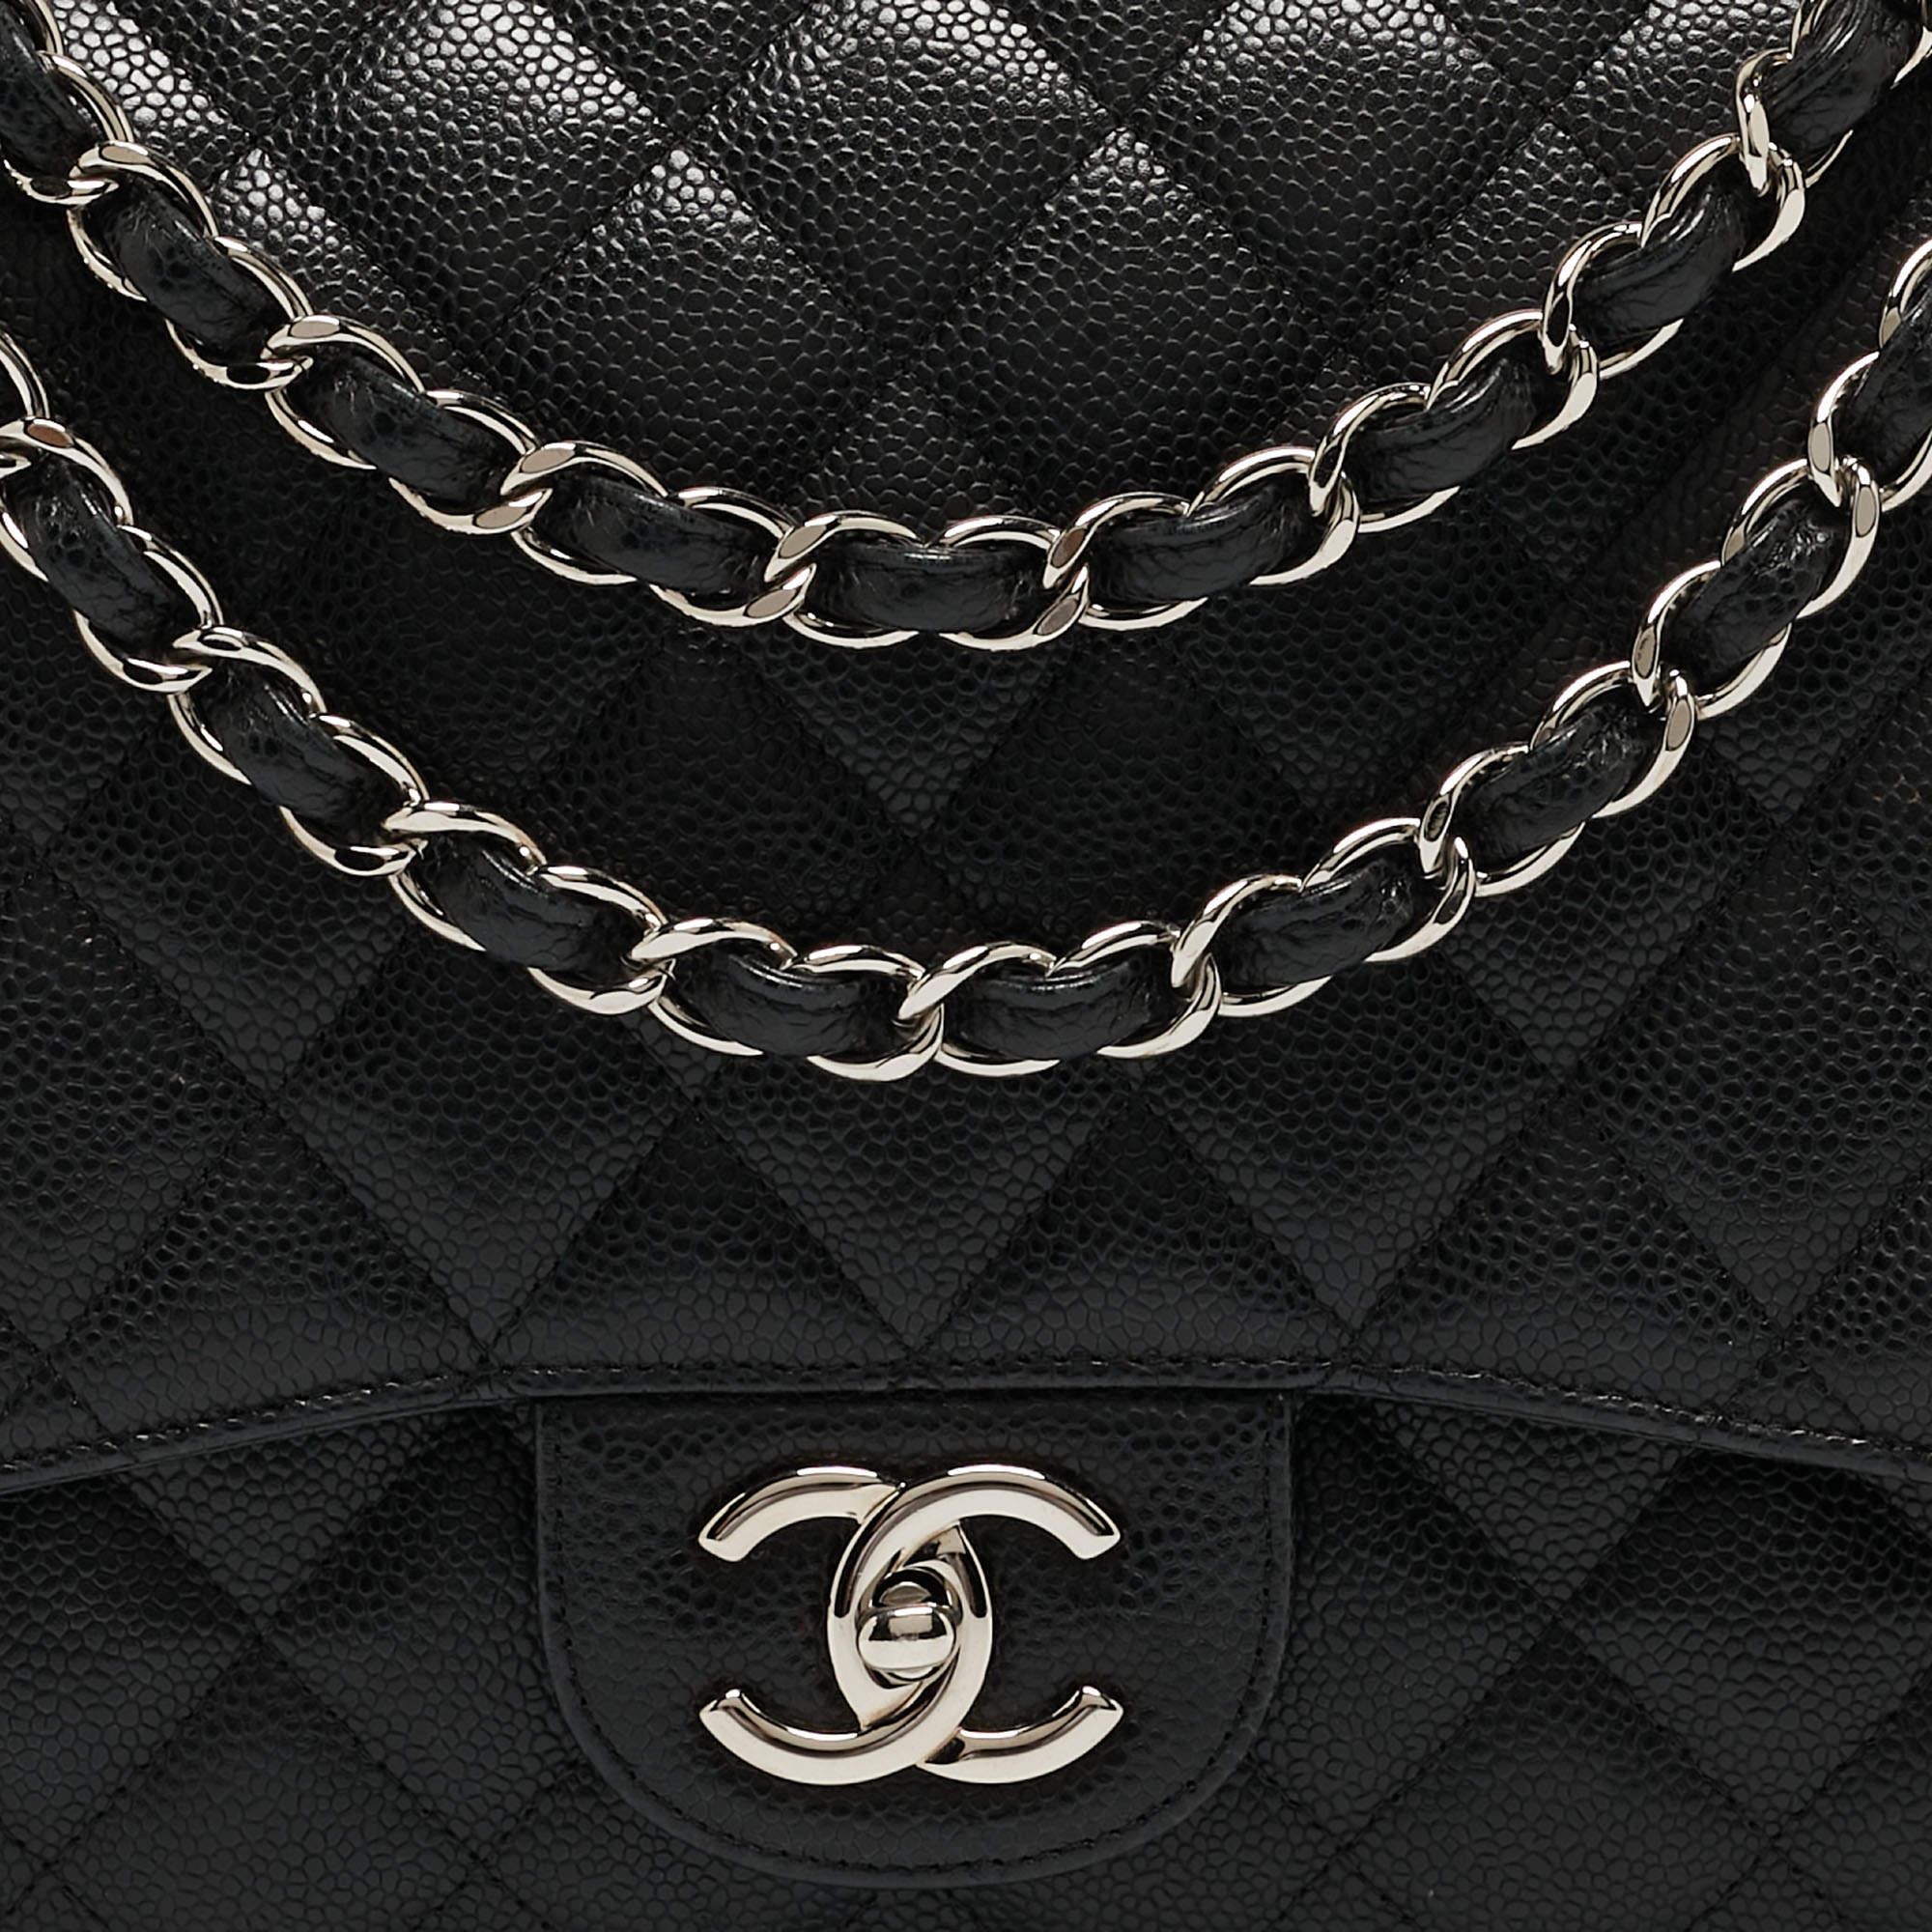 Chanel Black Quilted Caviar Leather Maxi Classic Double Flap Bag 15